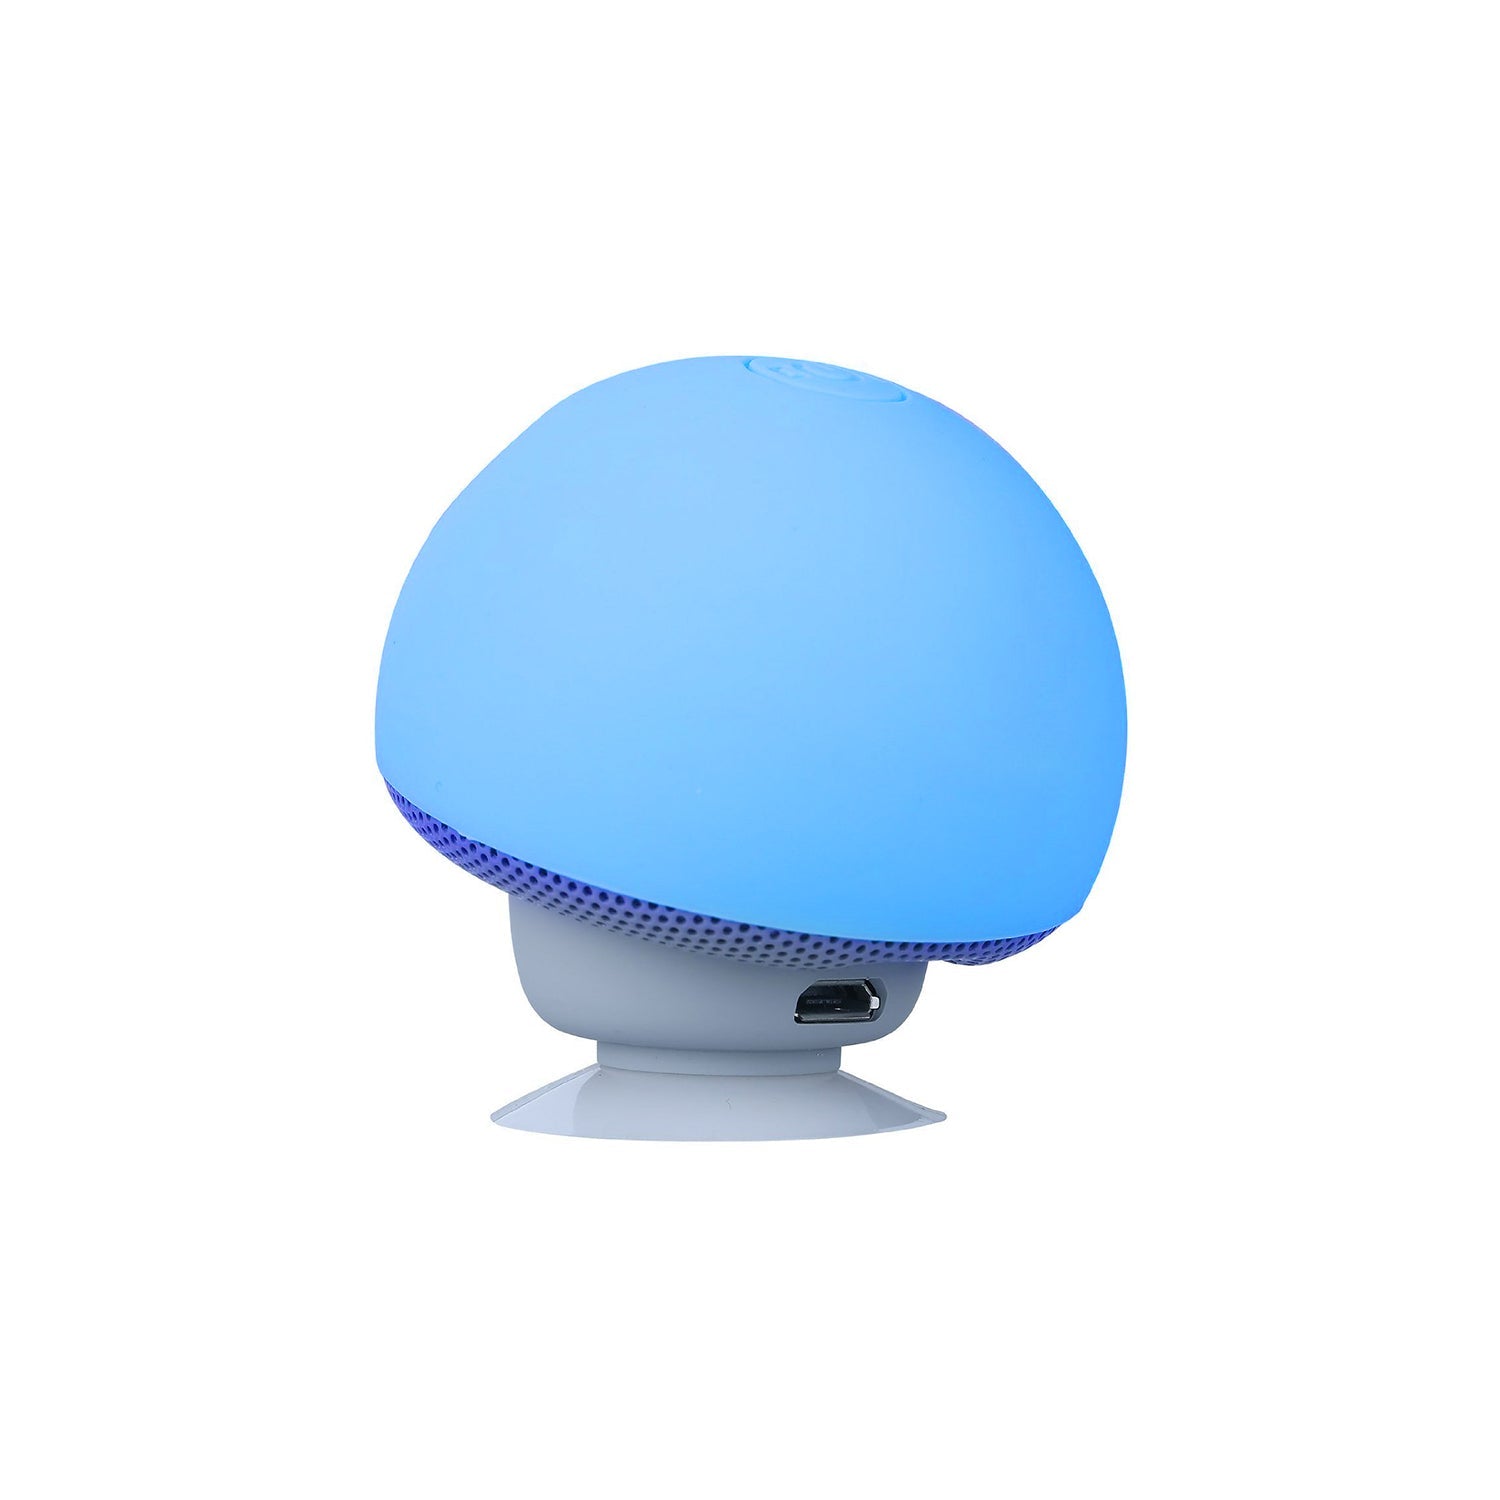 Mini mushroom Bluetooth wireless speaker, which can be used as a mobile phone support